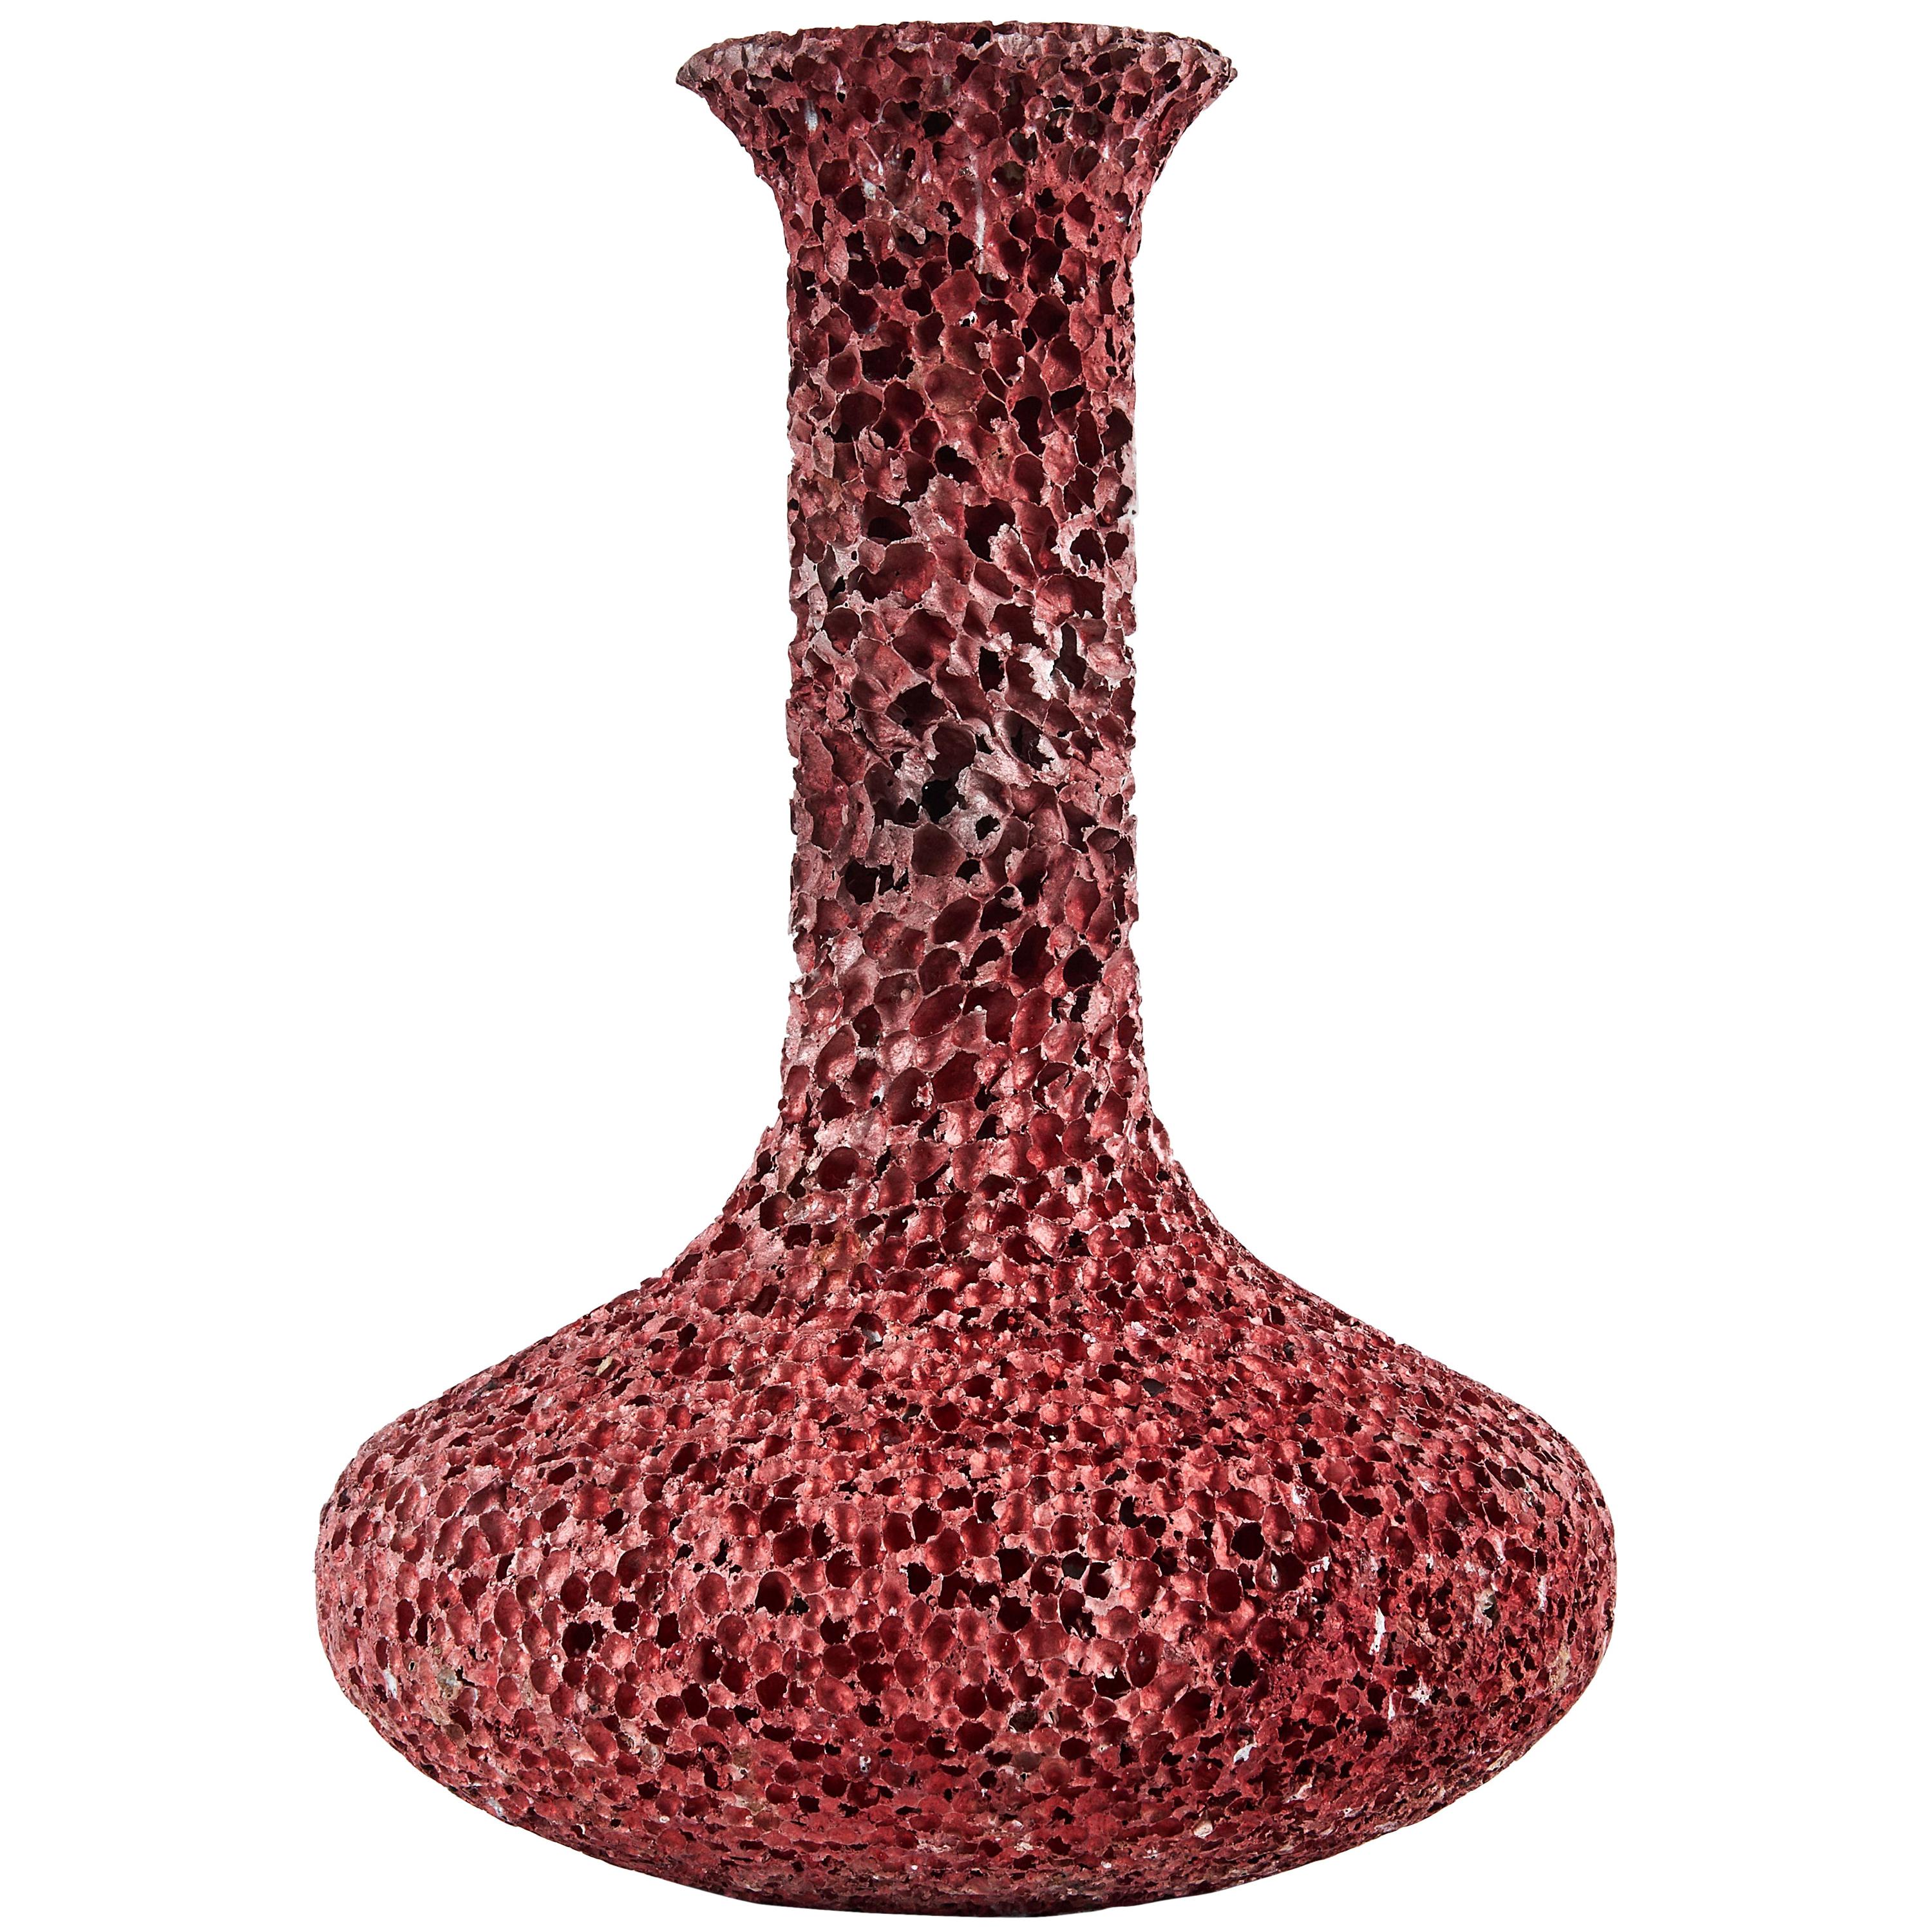 Dynasty Vase #4 - Fire Colored Table Vessel Aluminium Foam by Michael Young